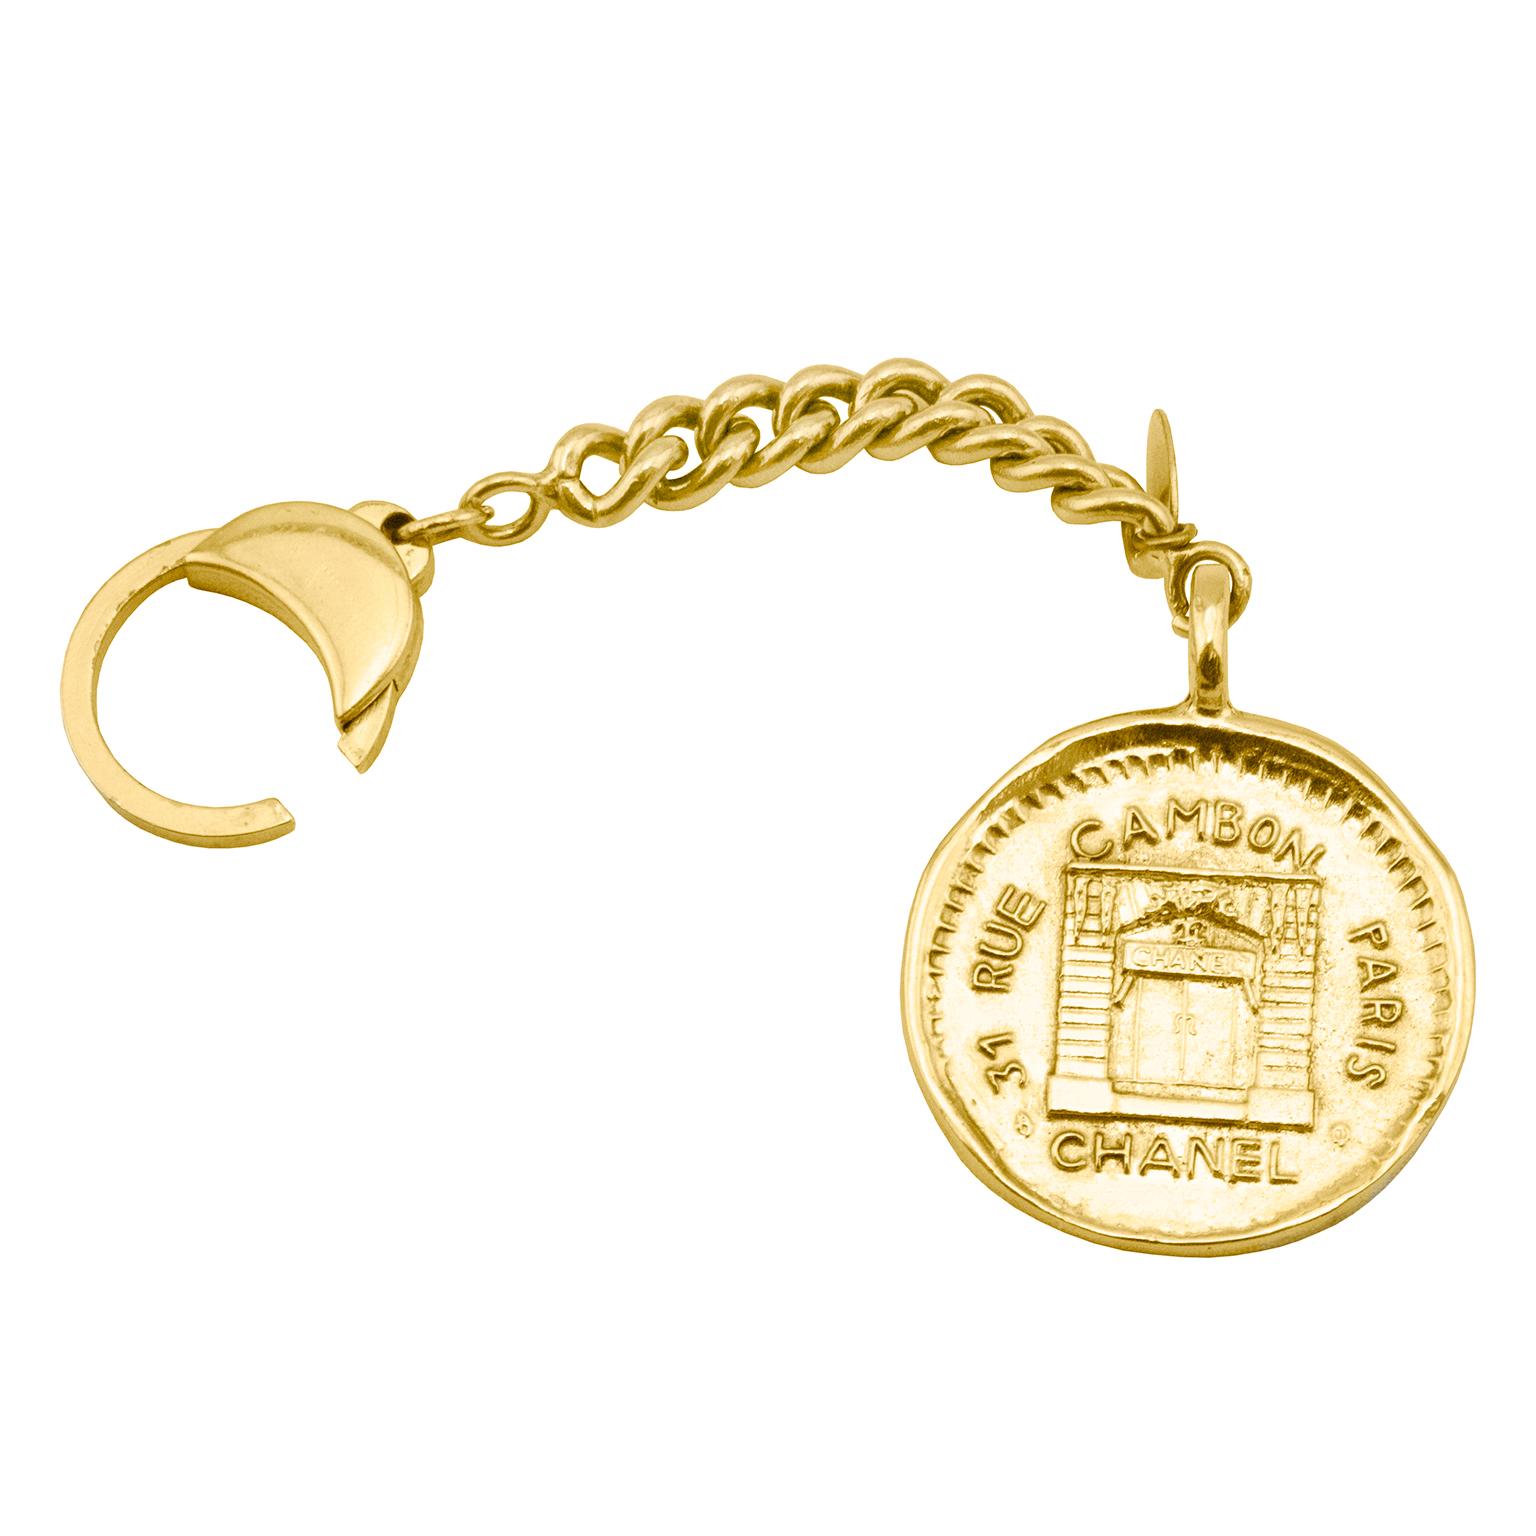 1984 Chanel Rue Cambon Stamped Coin Keychain